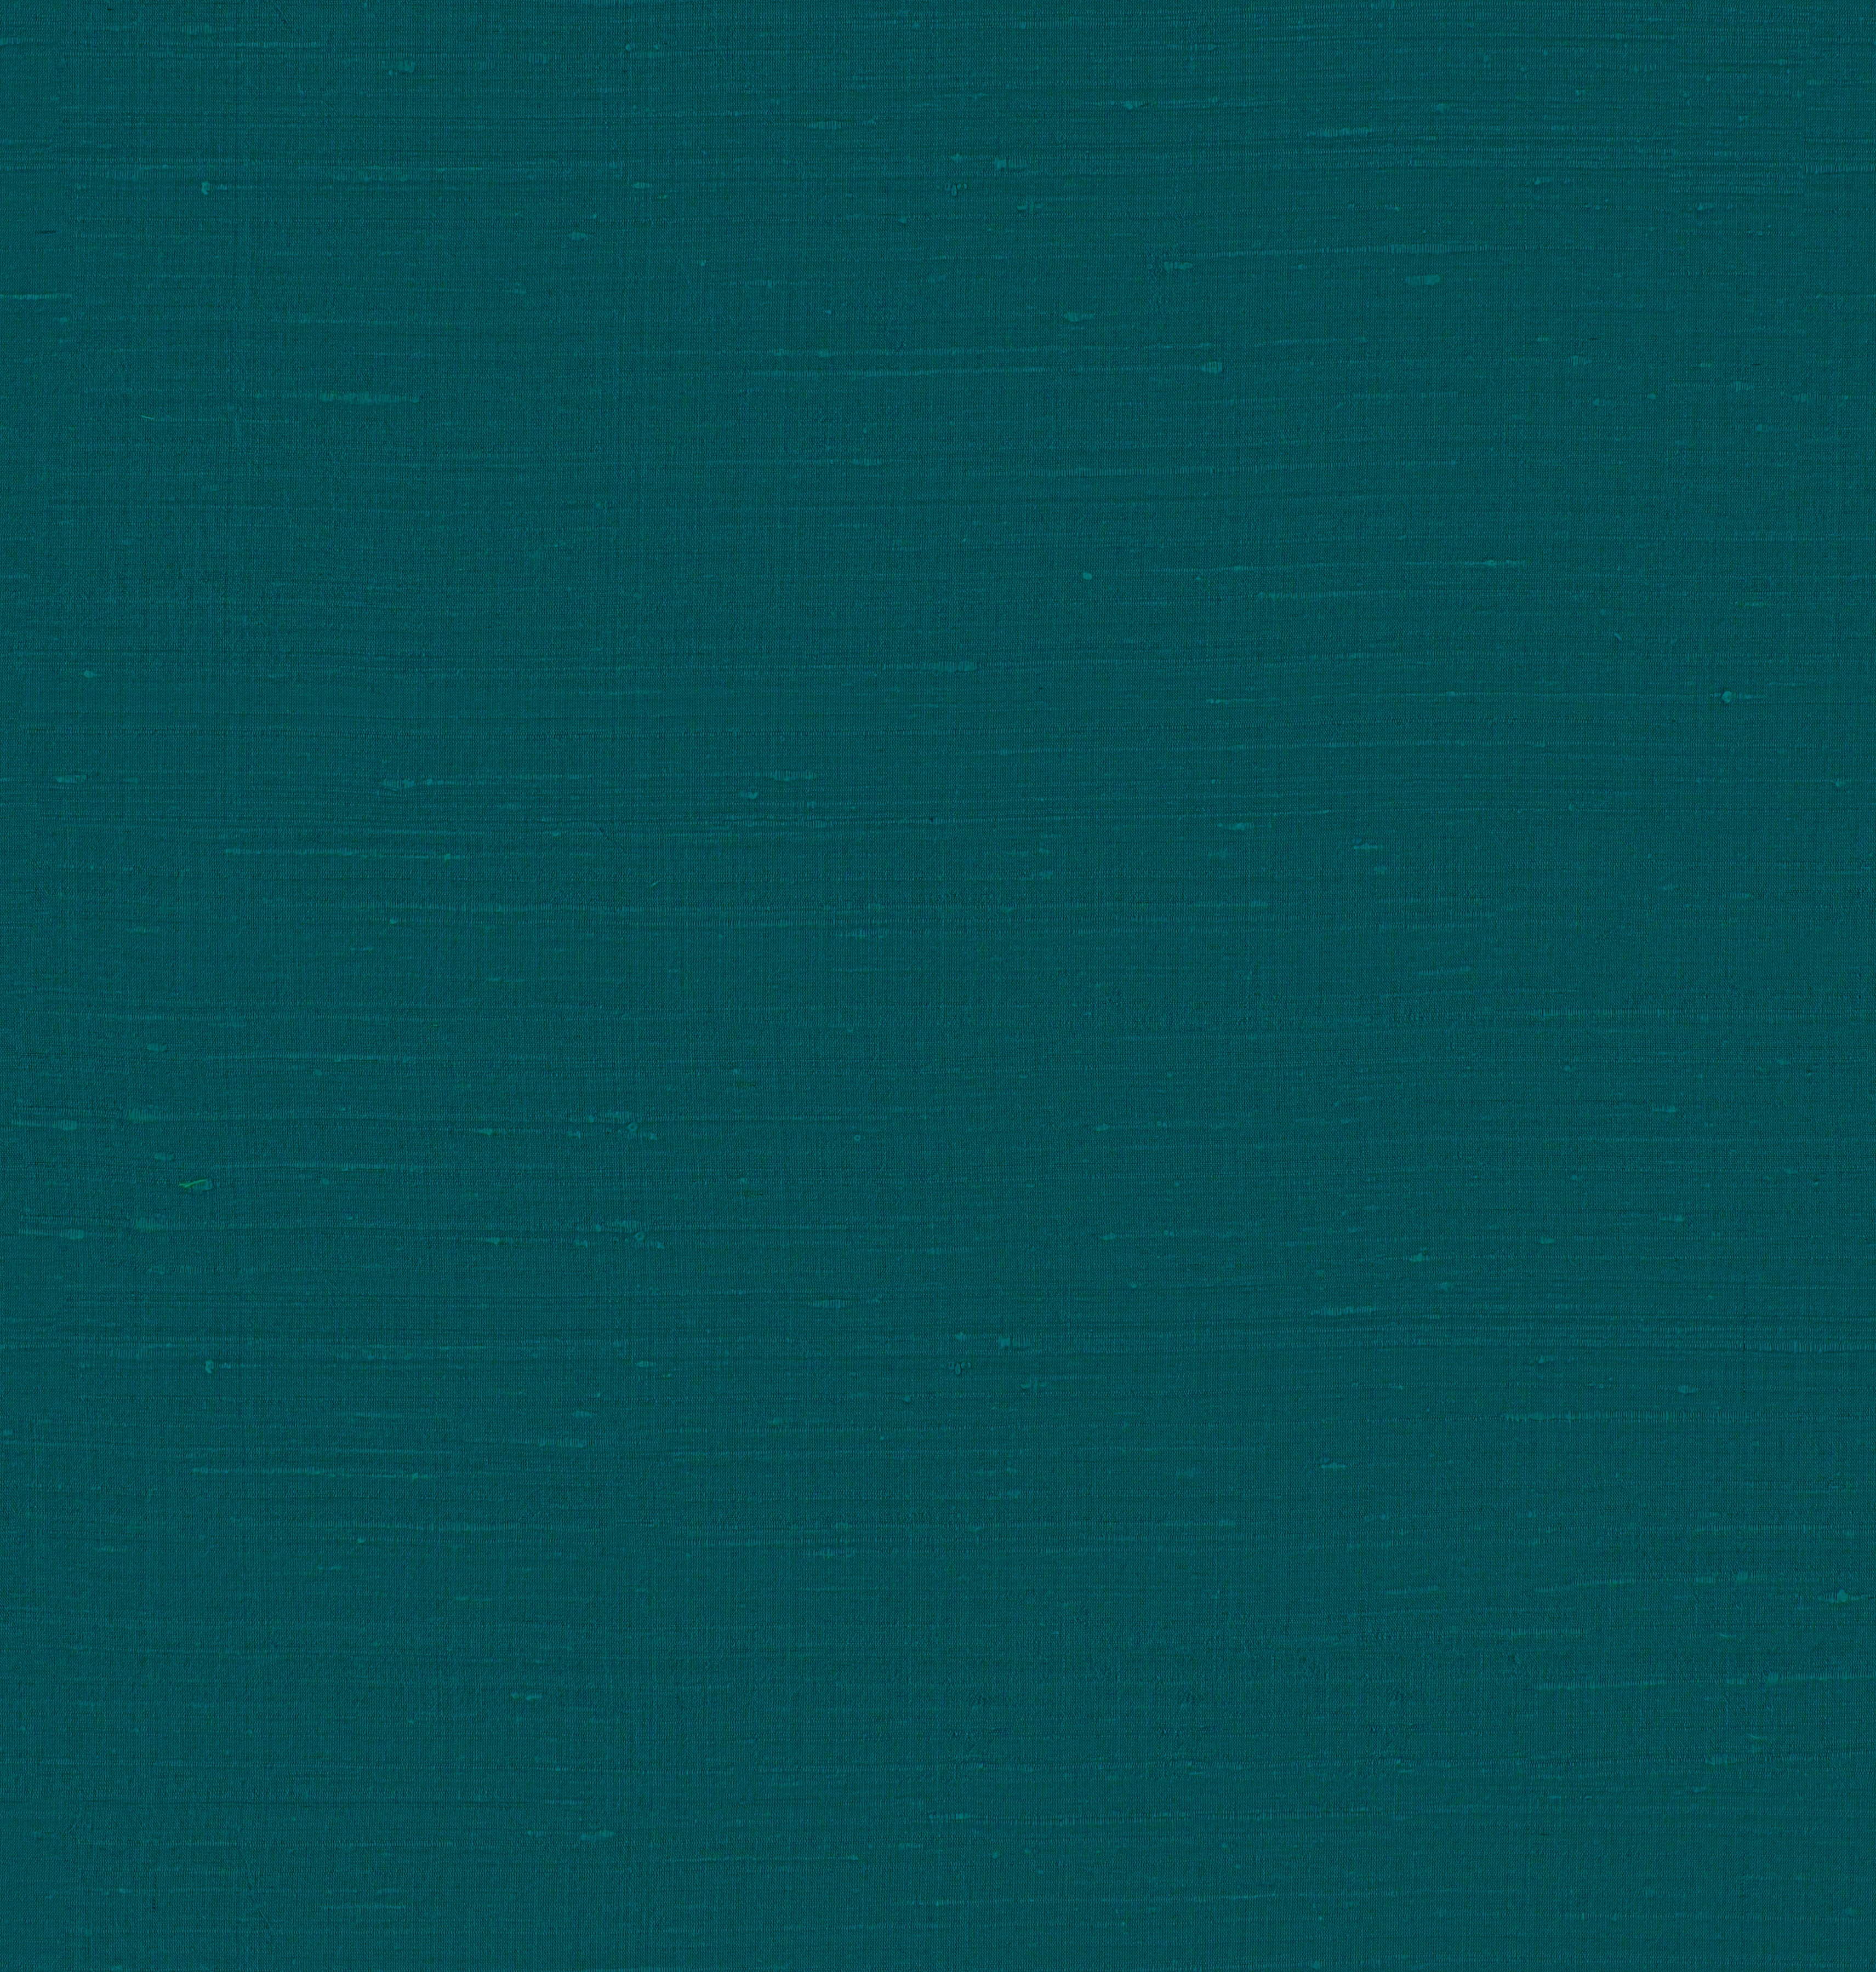 Teal coloured Silk fabric swatch